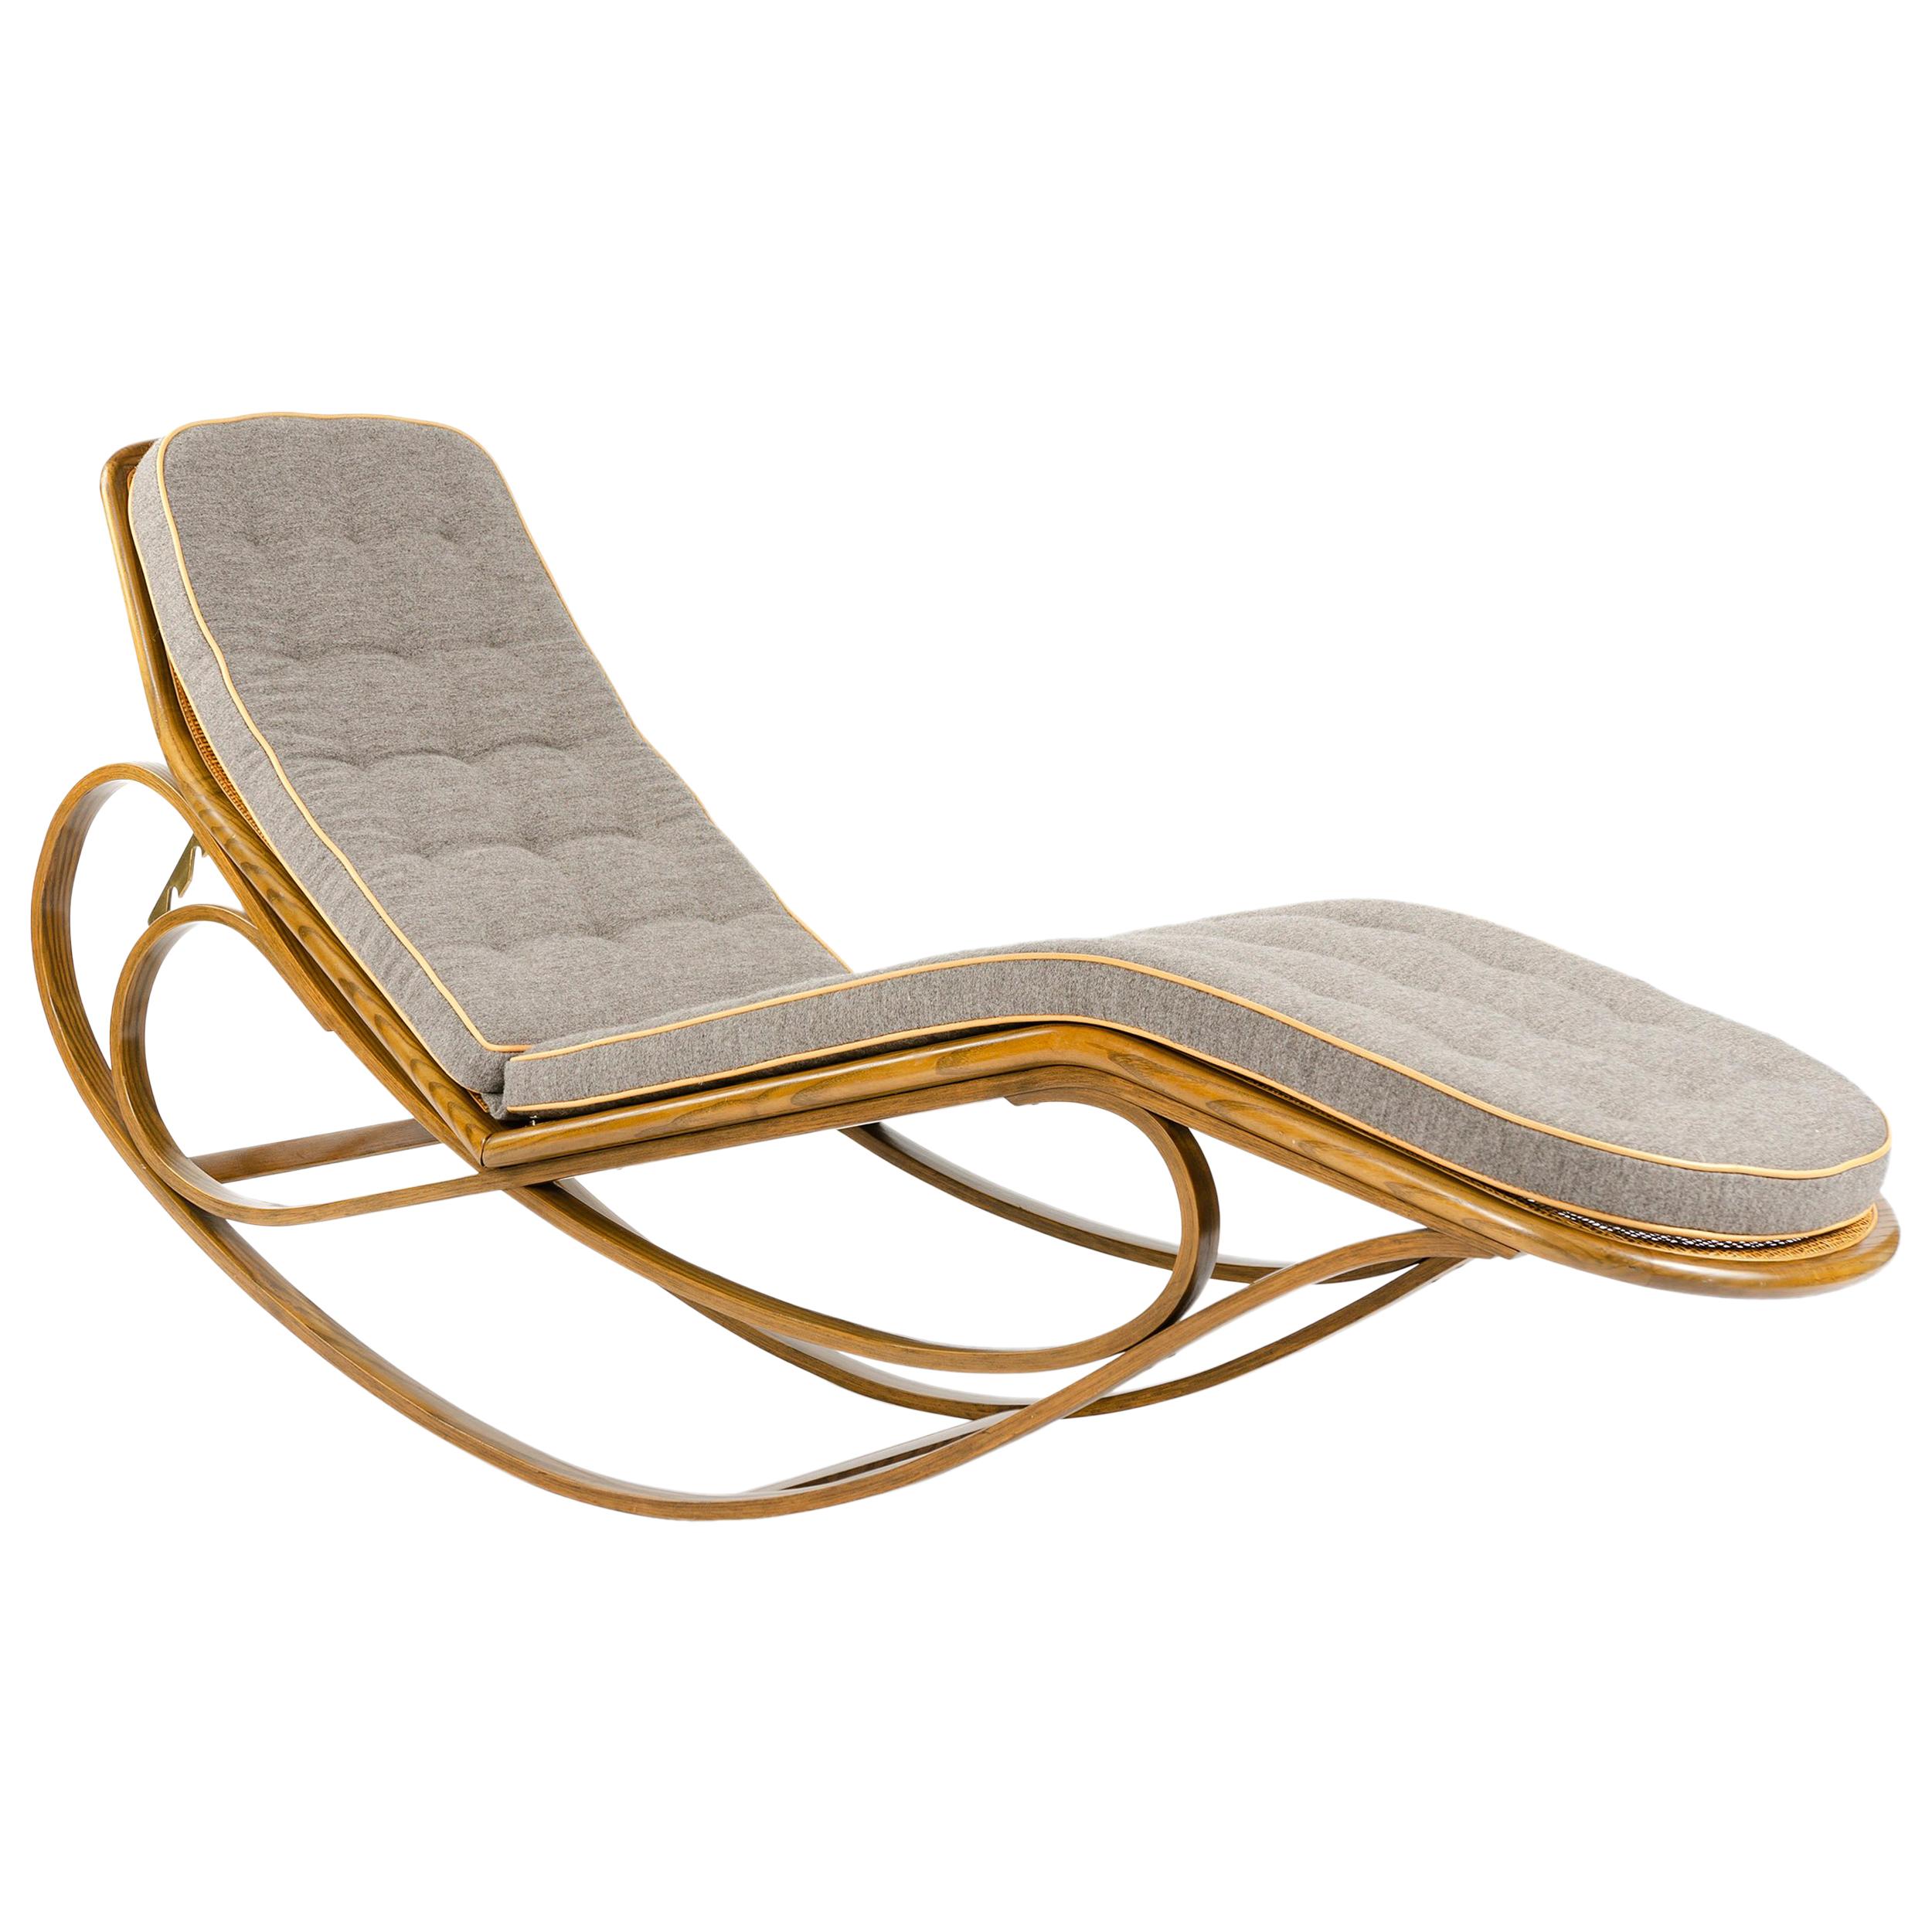 1940s Rocking Chaise Lounge by Edward Wormley for Dunbar